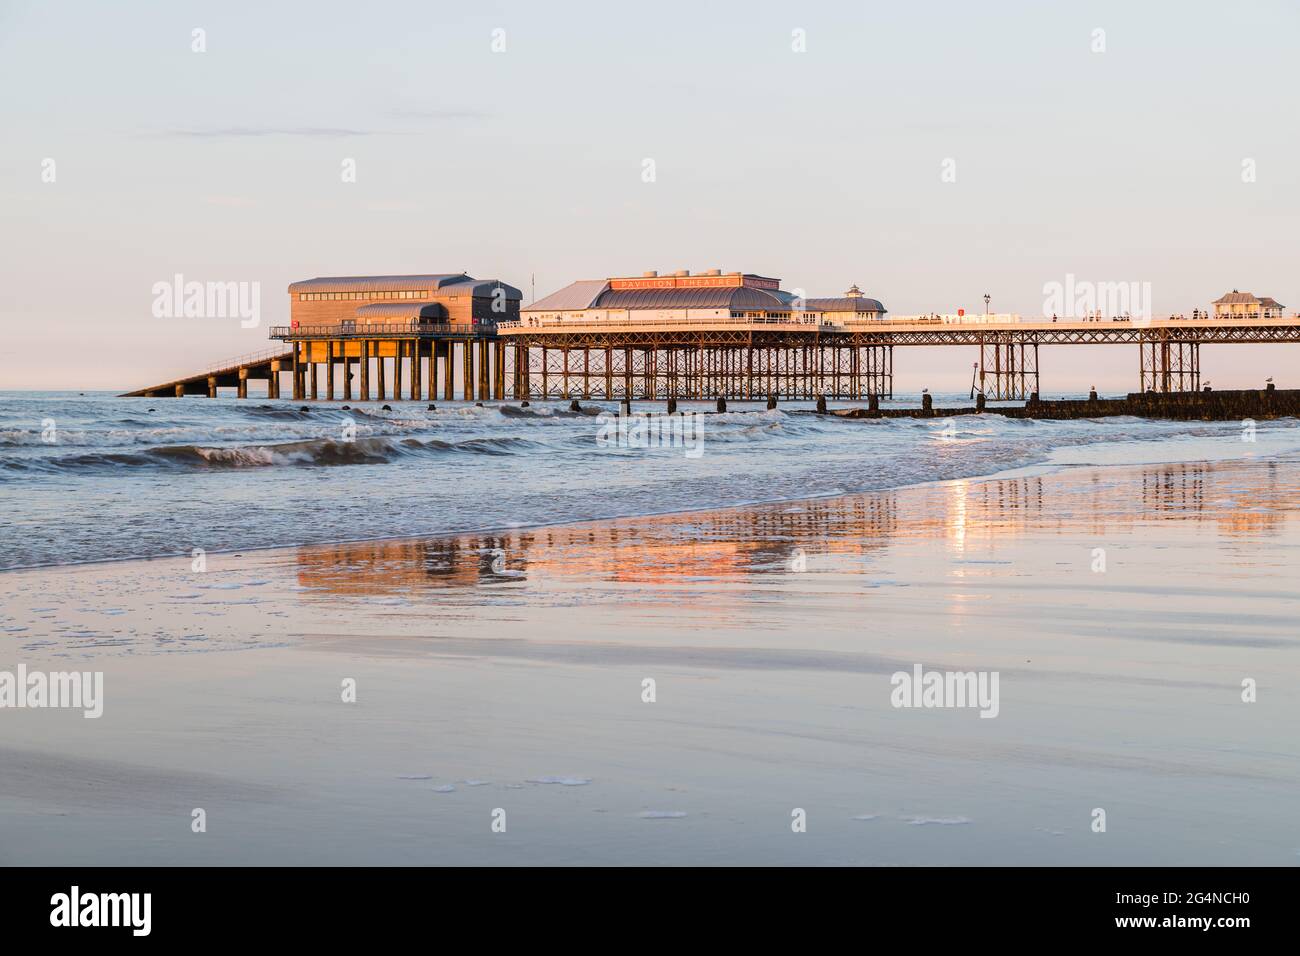 Cromer pier at sunset seen in June 2021 from the West beach with the sun lighting up the sandy beach. Stock Photo